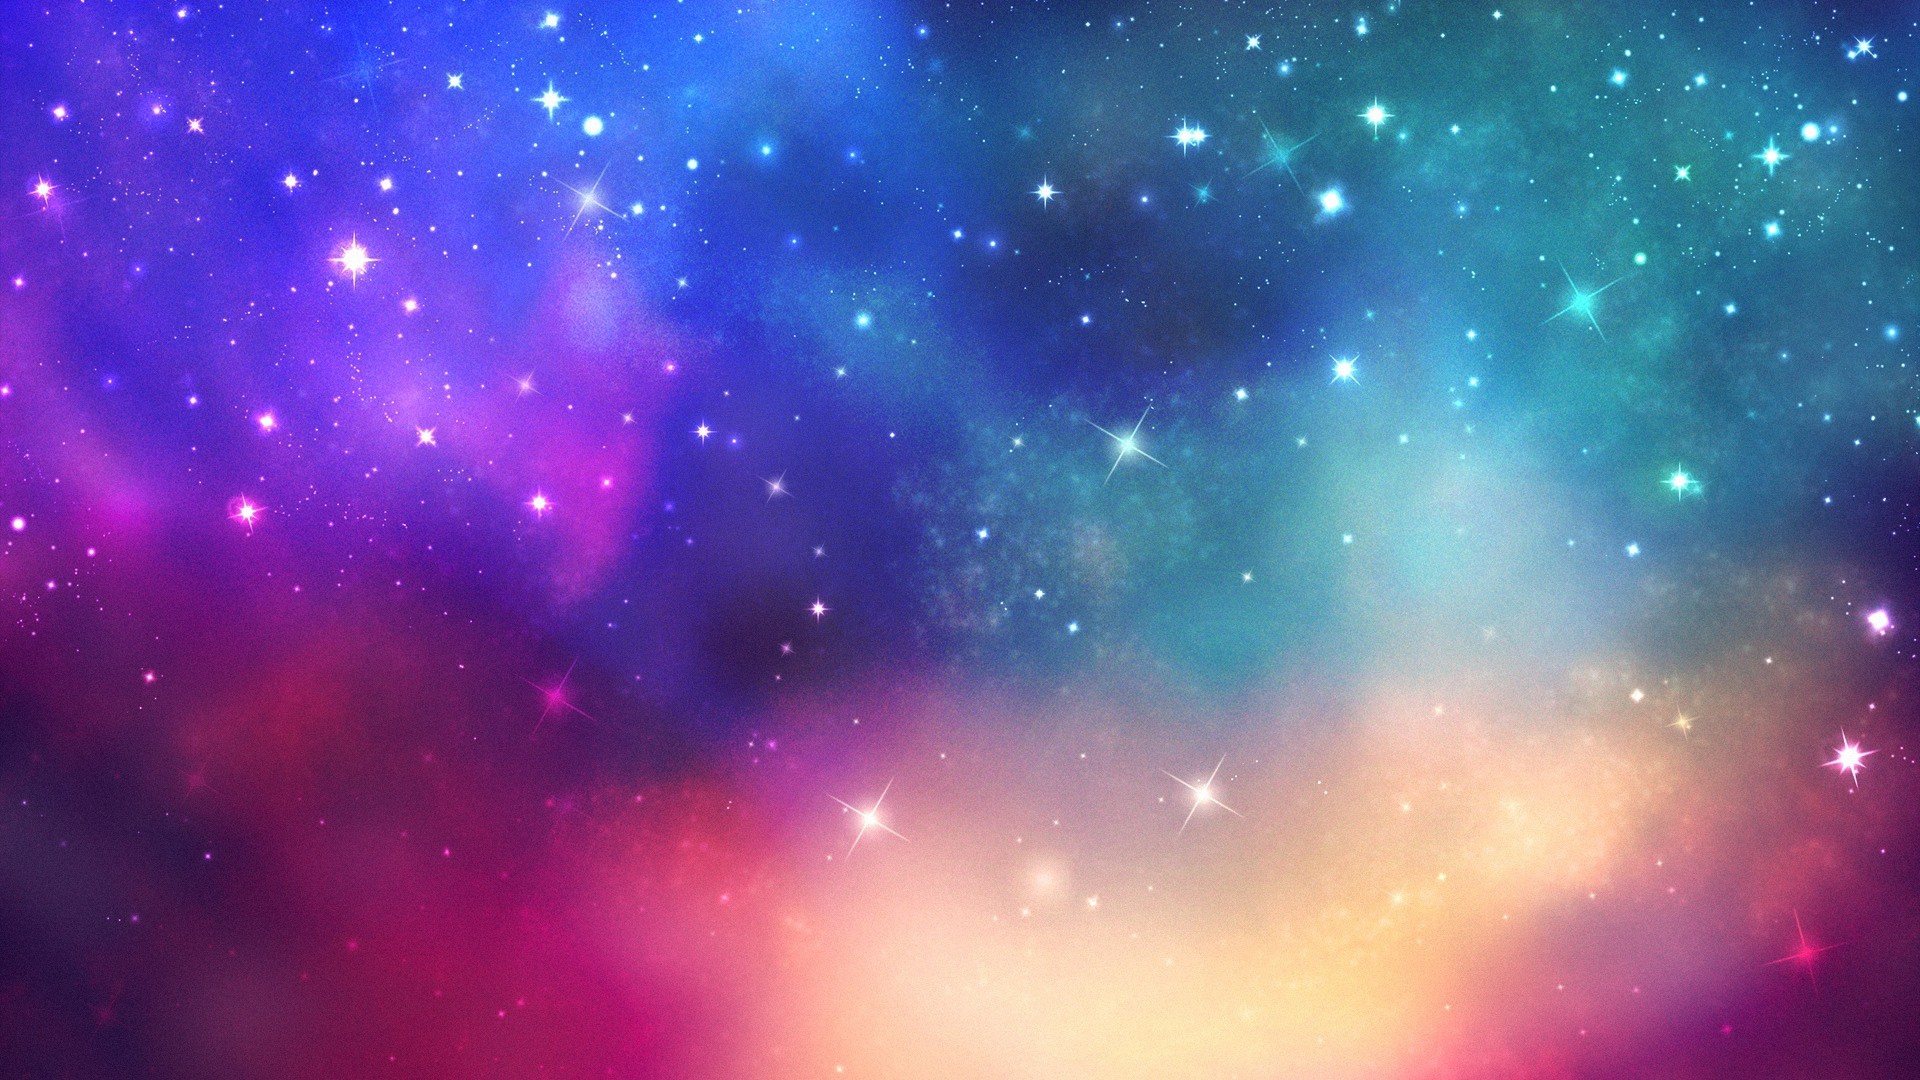 Galaxy Wallpaper Tumblr Download Free Beautiful Backgrounds For Desktop And Mobile Devices In Any Resolution Desktop Android Iphone Ipad 1920x1080 1366x768 360x640 1024x768 Etc Wallpapertag